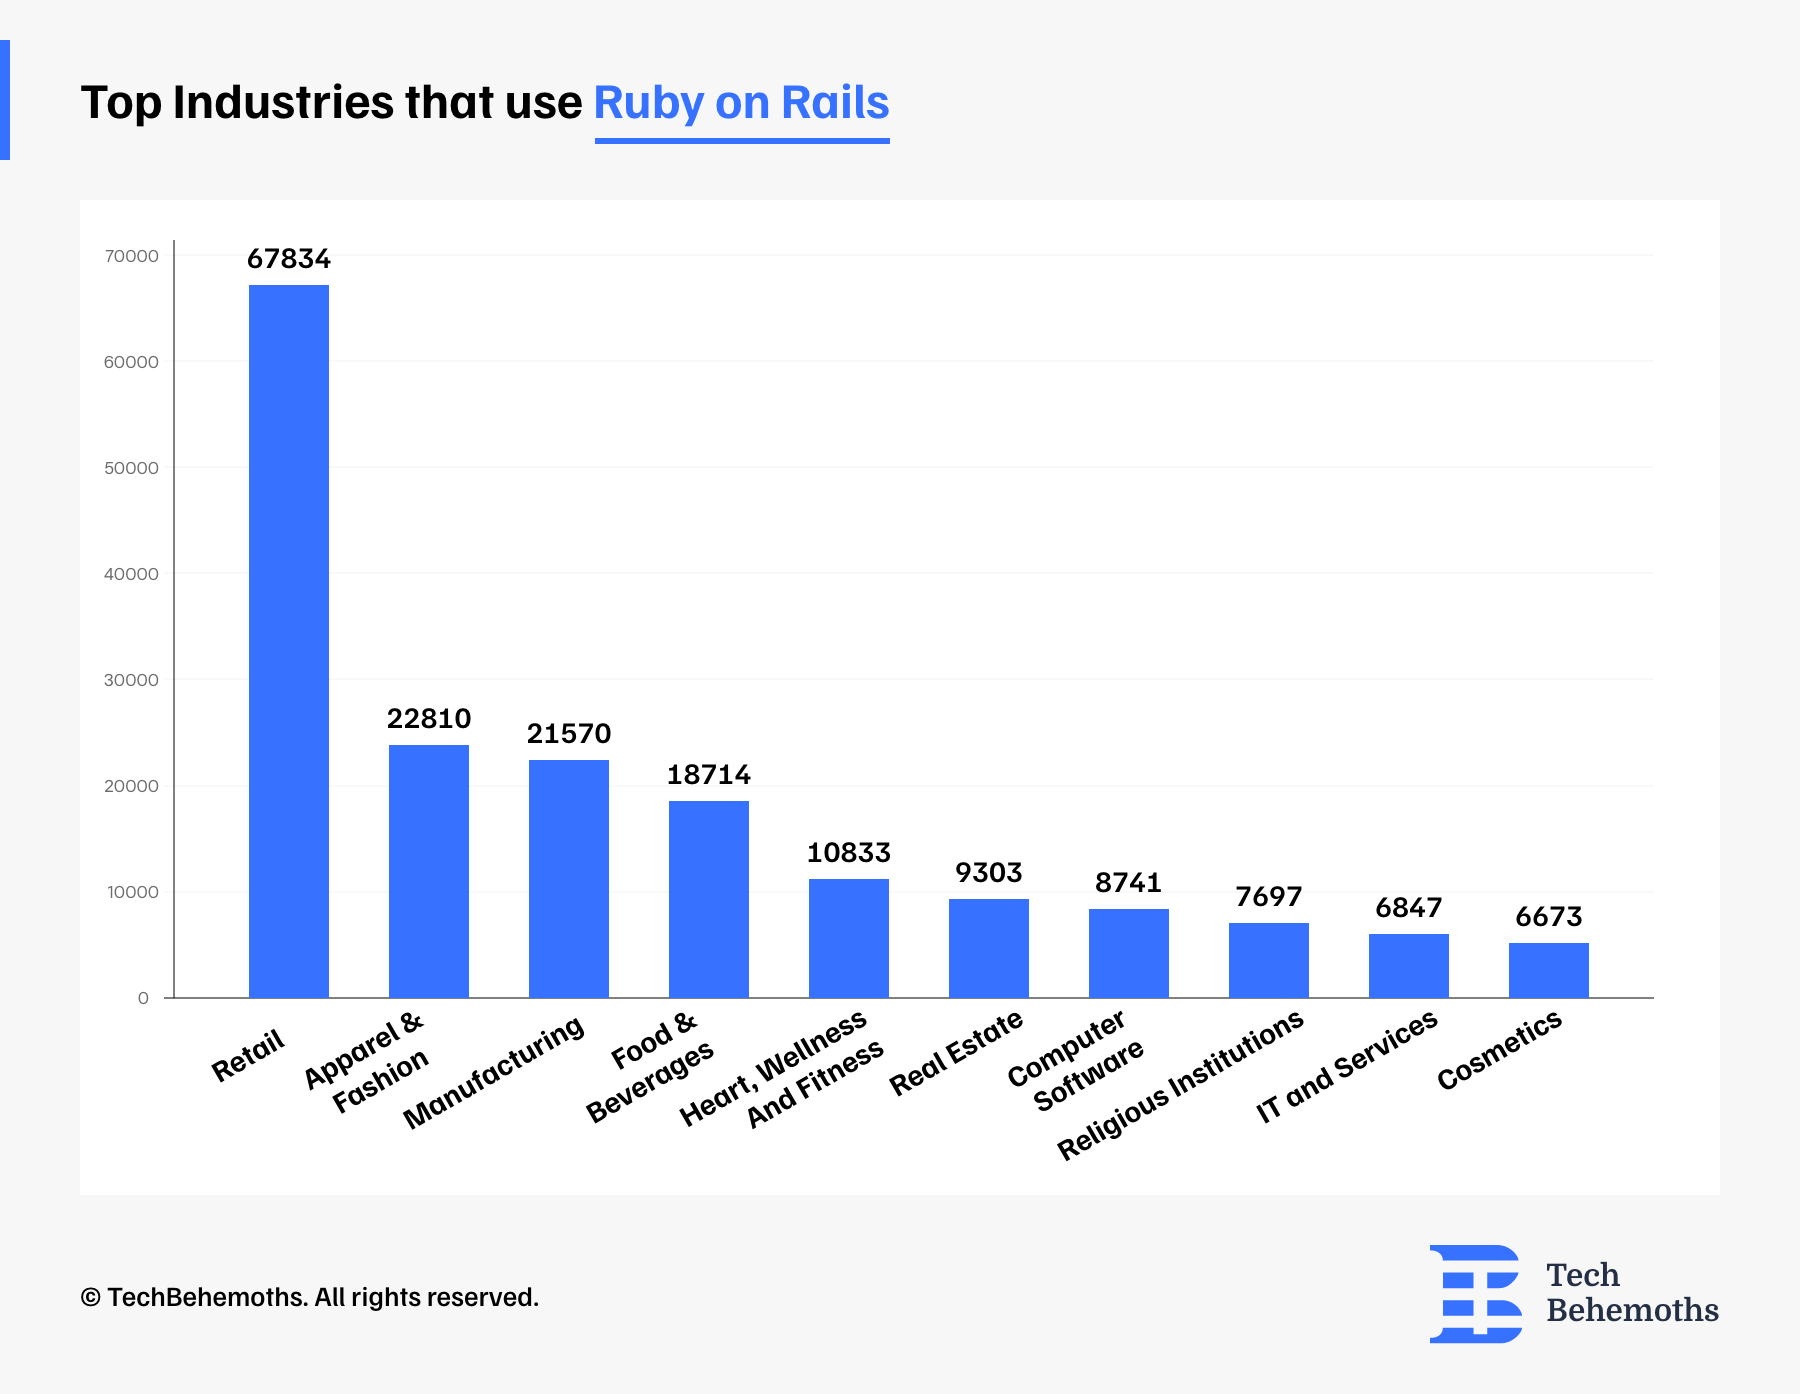 Top Industries that use Ruby on Rails